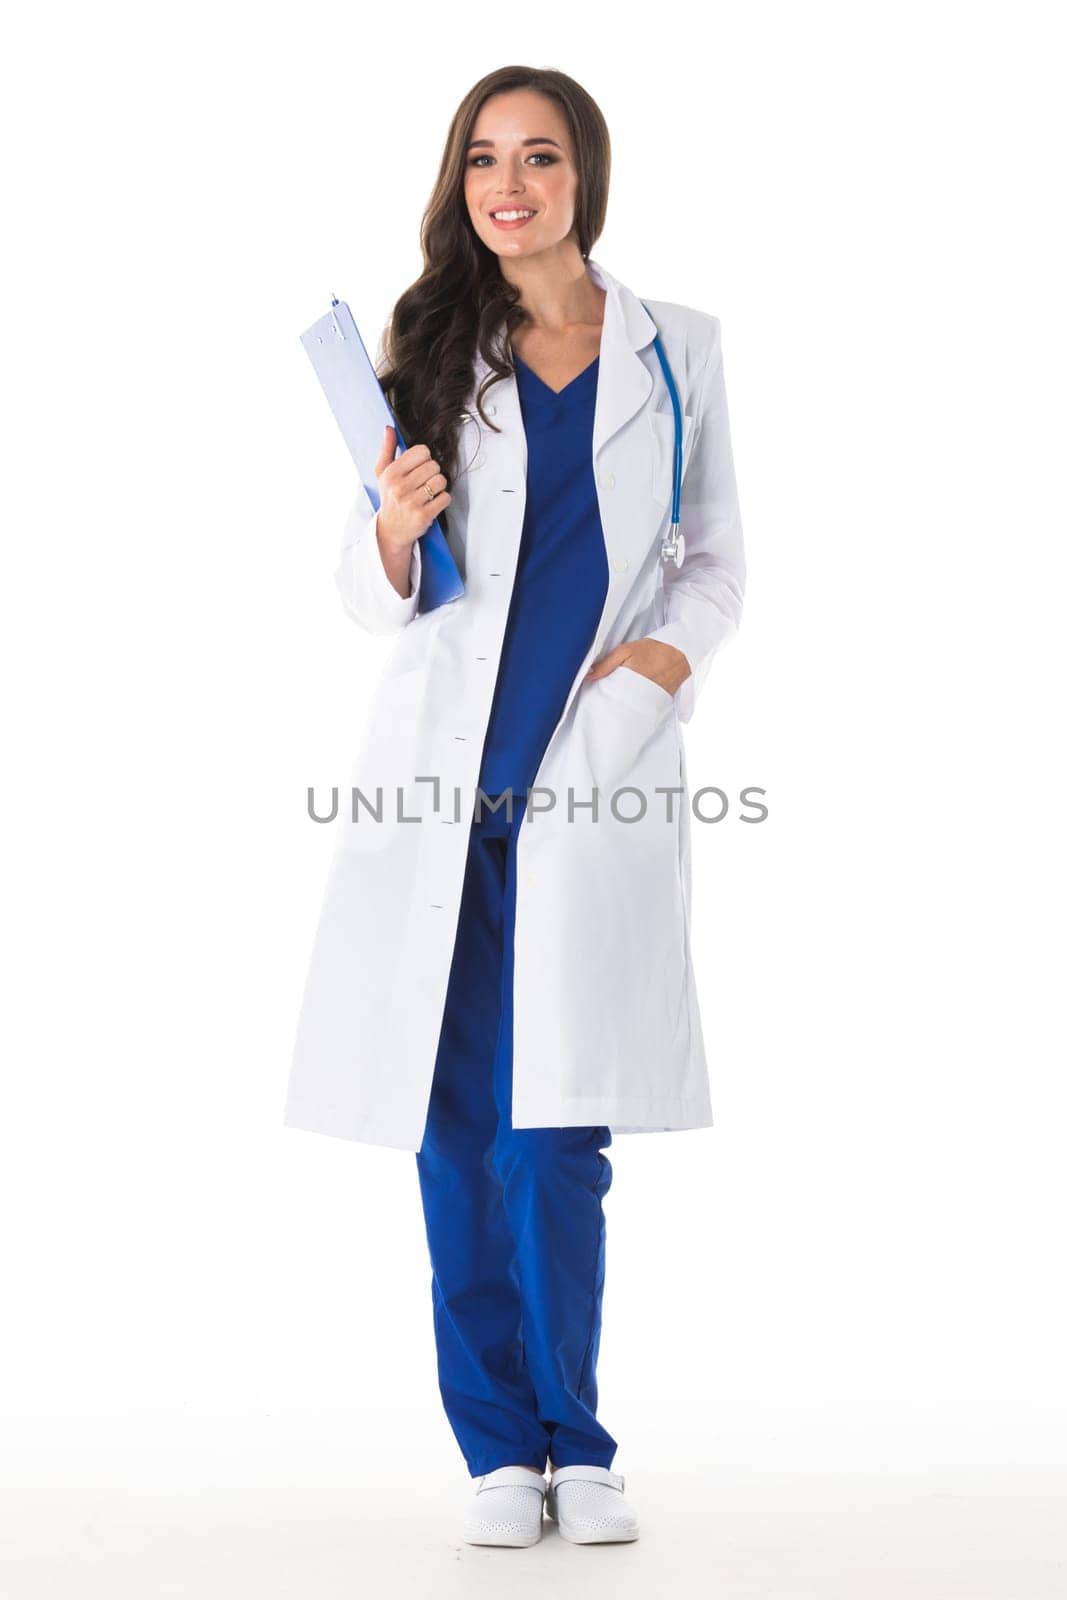 Smiling female doctor with a folder in uniform isolated on white background